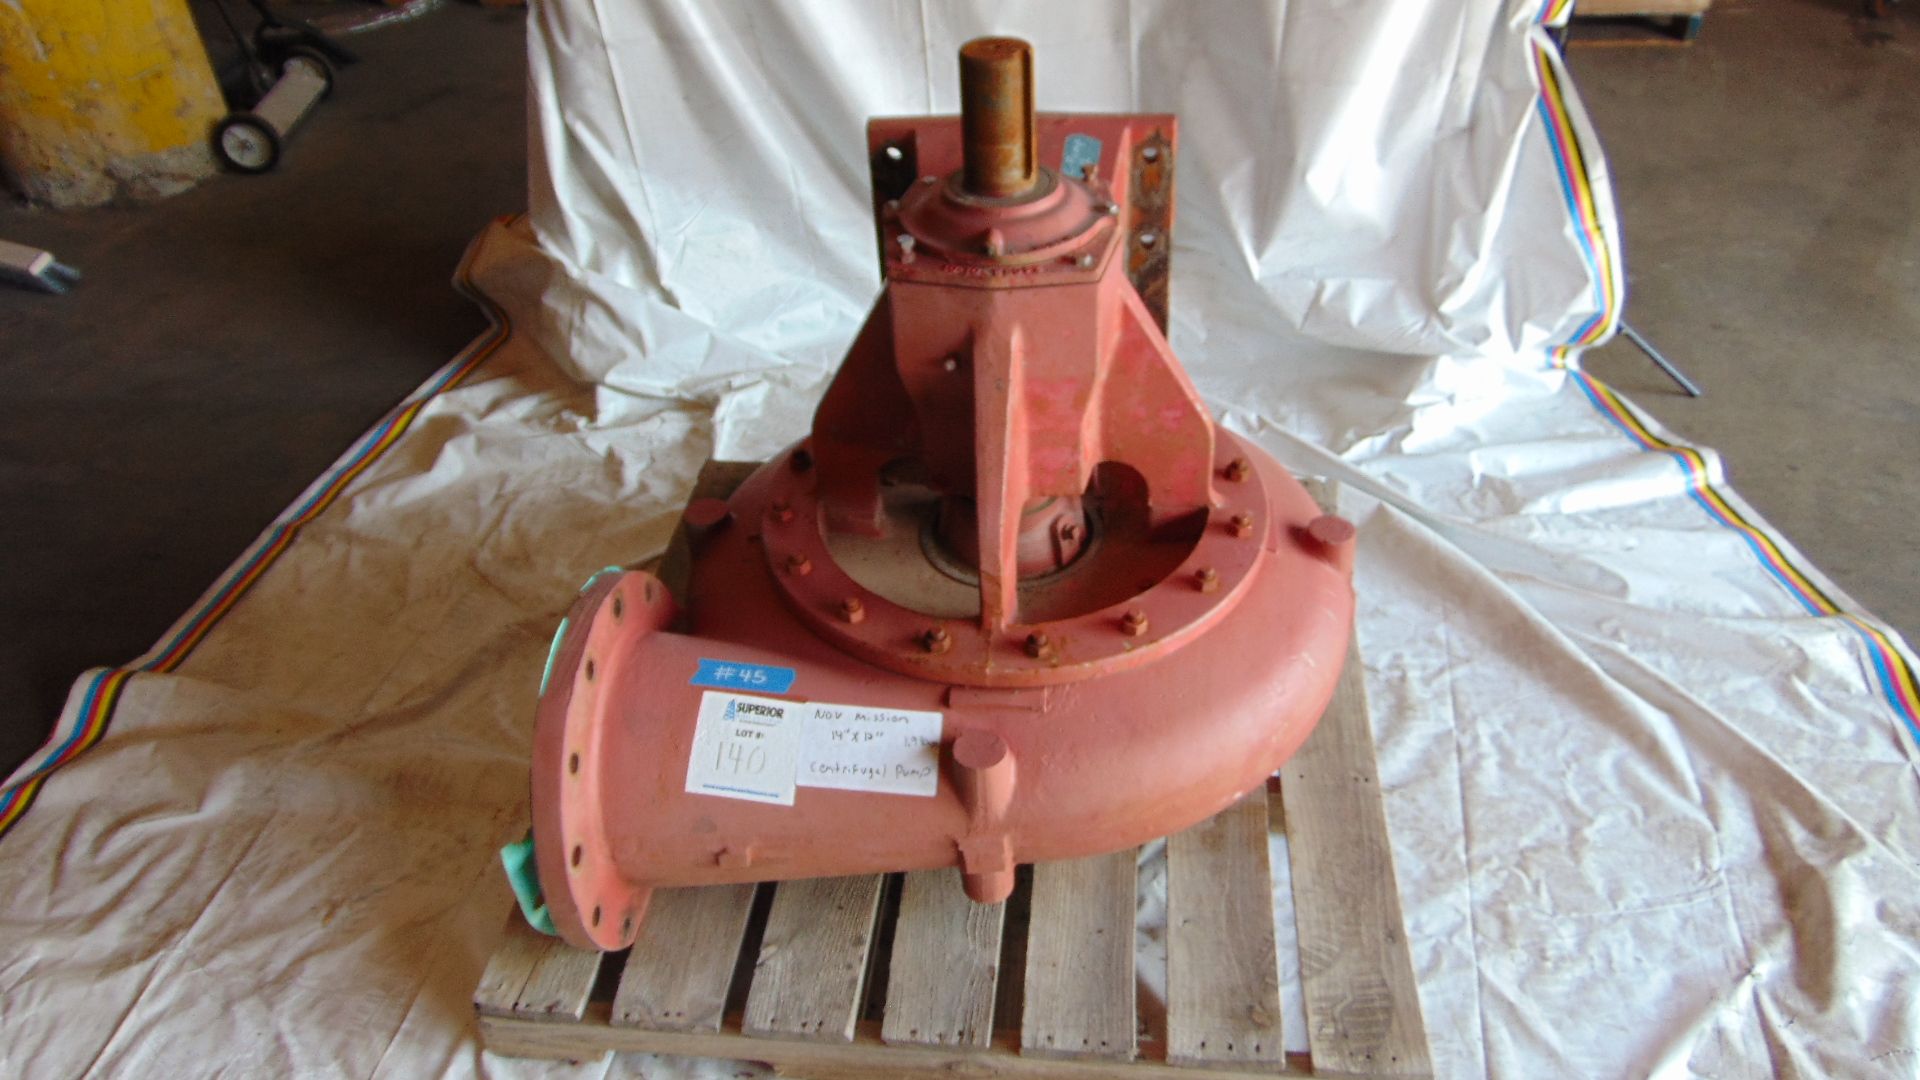 Centrifugal Pump Nov Mission 4"x12"-Centrifugal-1,986lbs Location: Forest Hills, Texas - Image 4 of 28